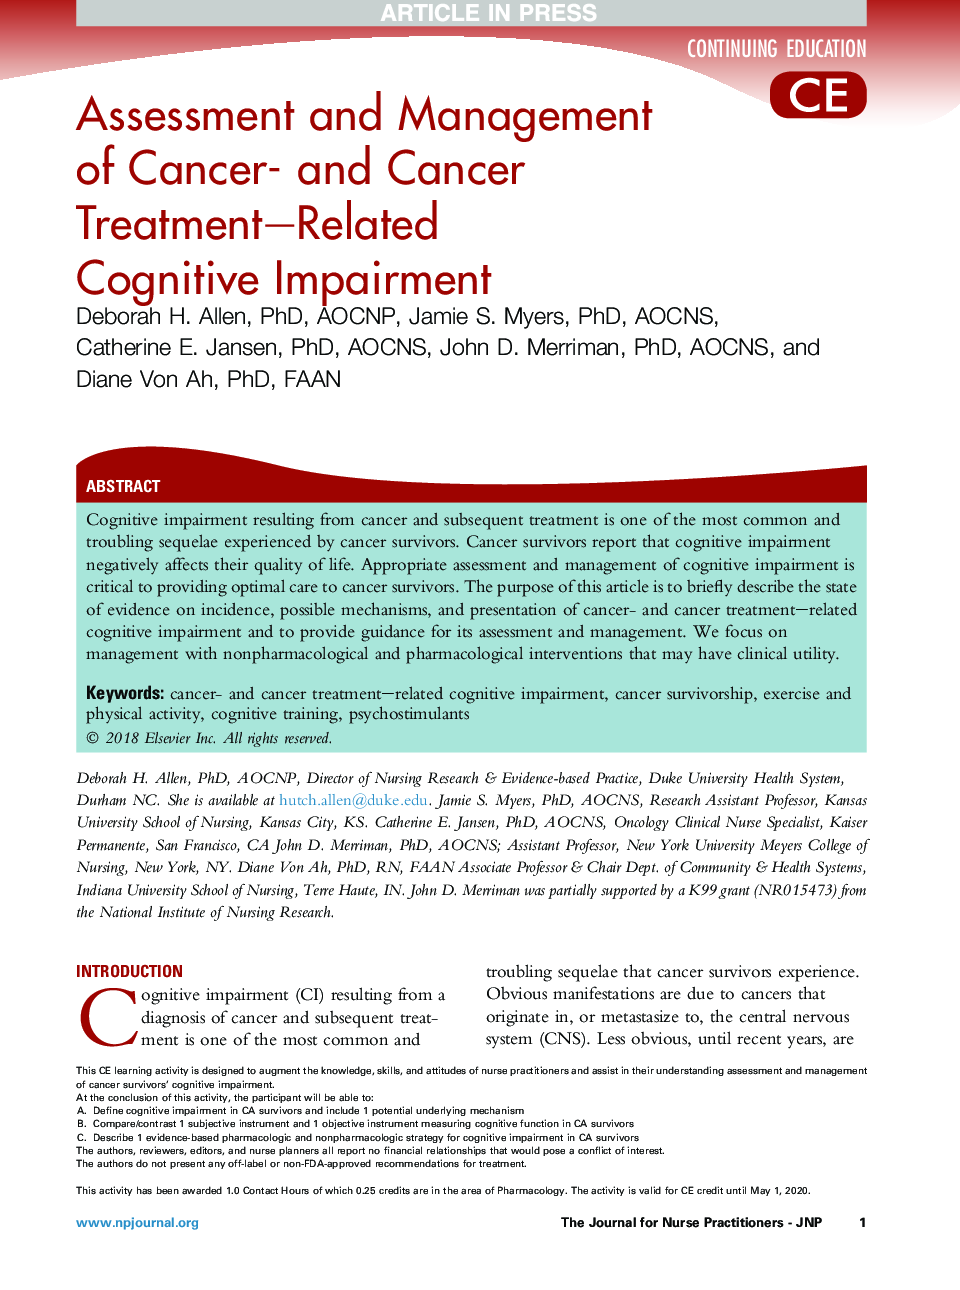 Assessment and Management ofÂ Cancer- and Cancer Treatment-Related CognitiveÂ Impairment